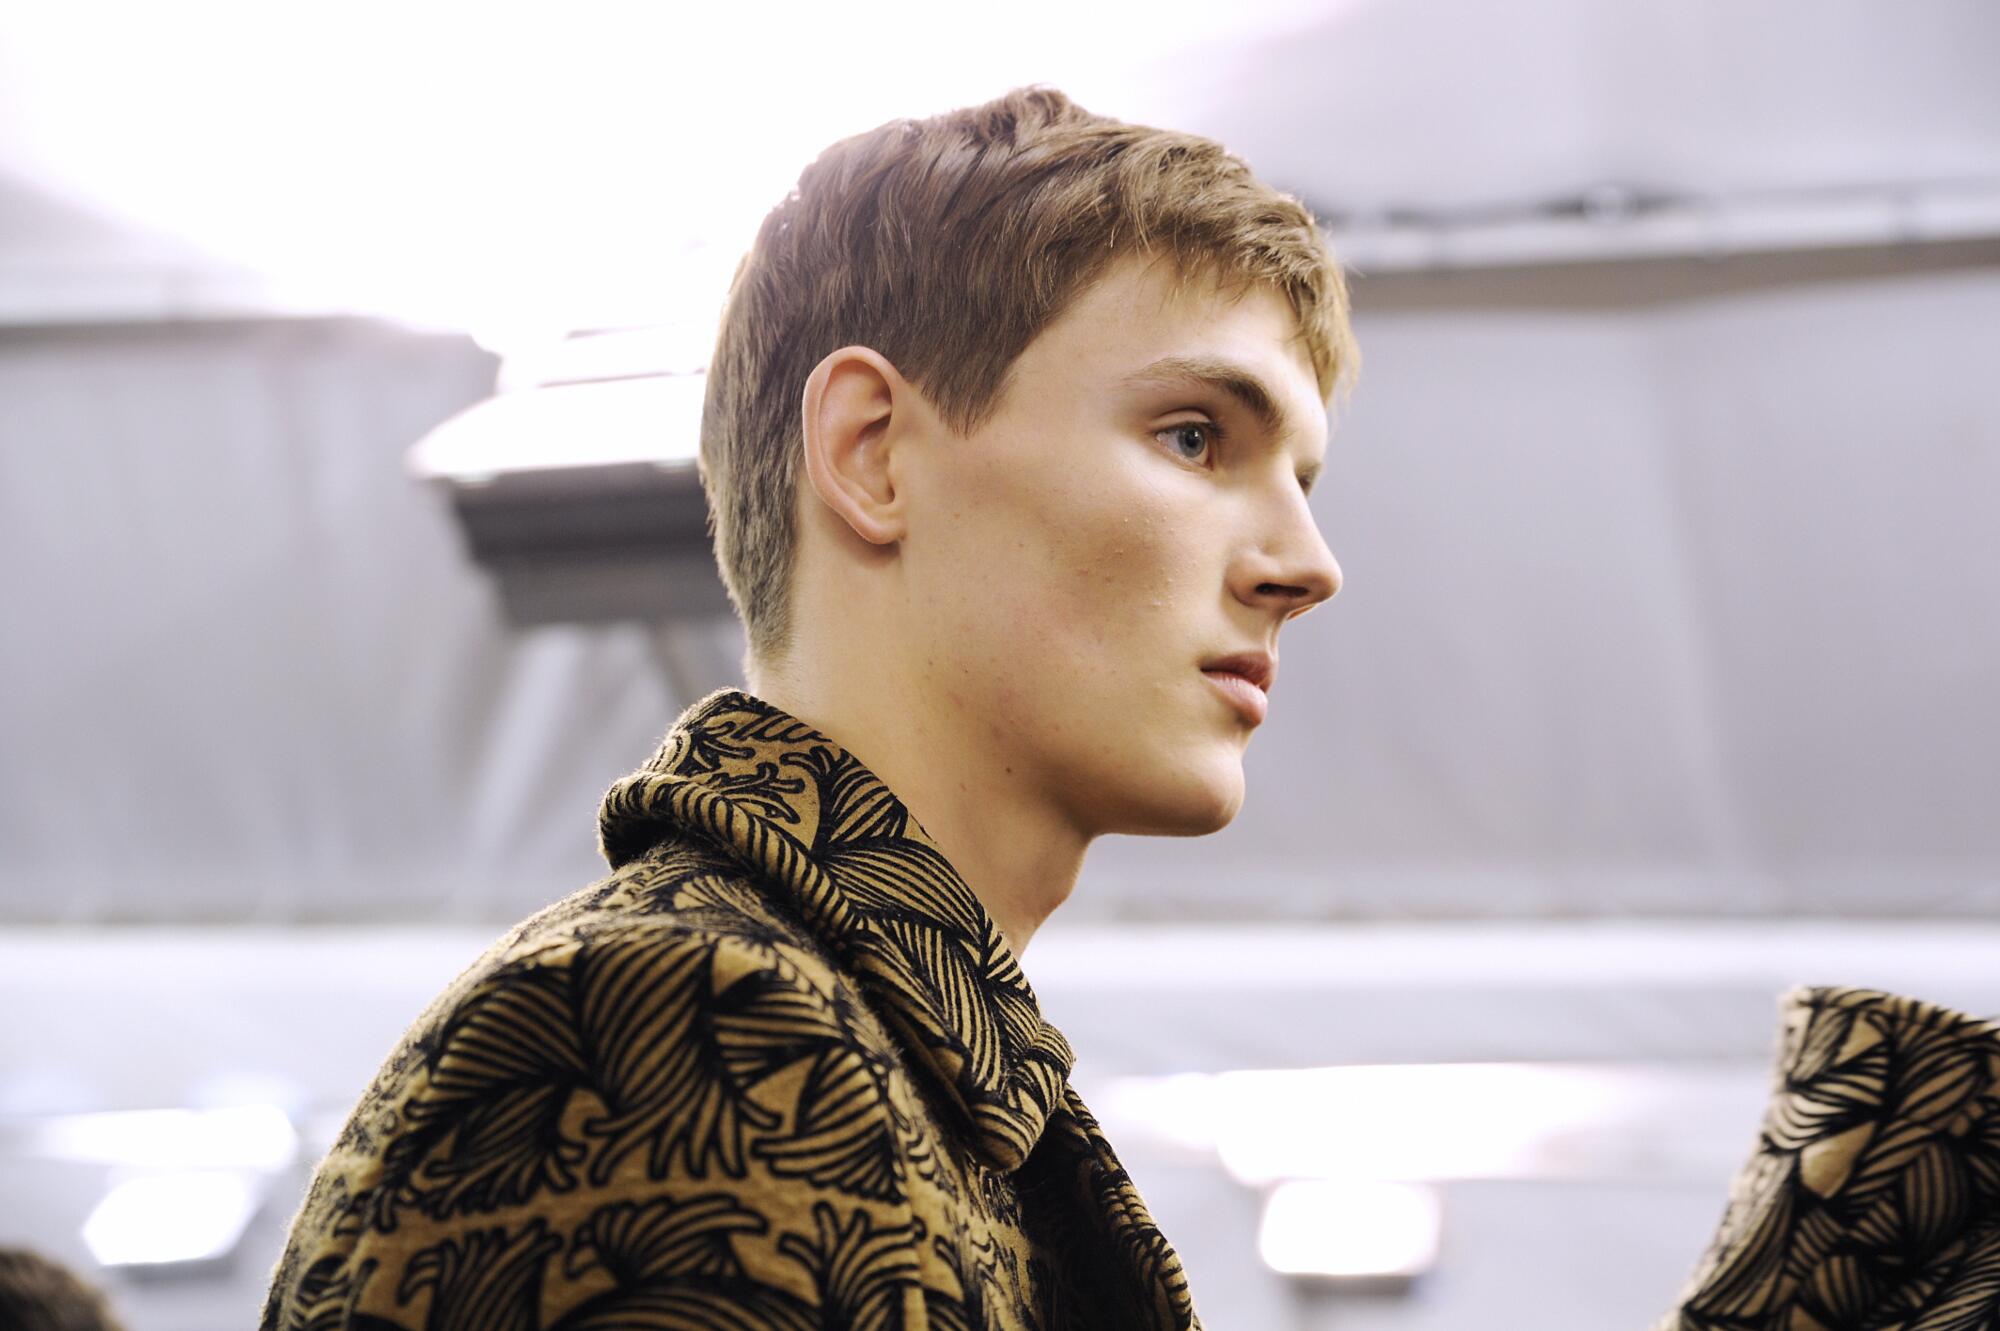 BACKSTAGE LOUIS VUITTON FW 2015-16 MEN’S COLLECTION | The Skinny Beep